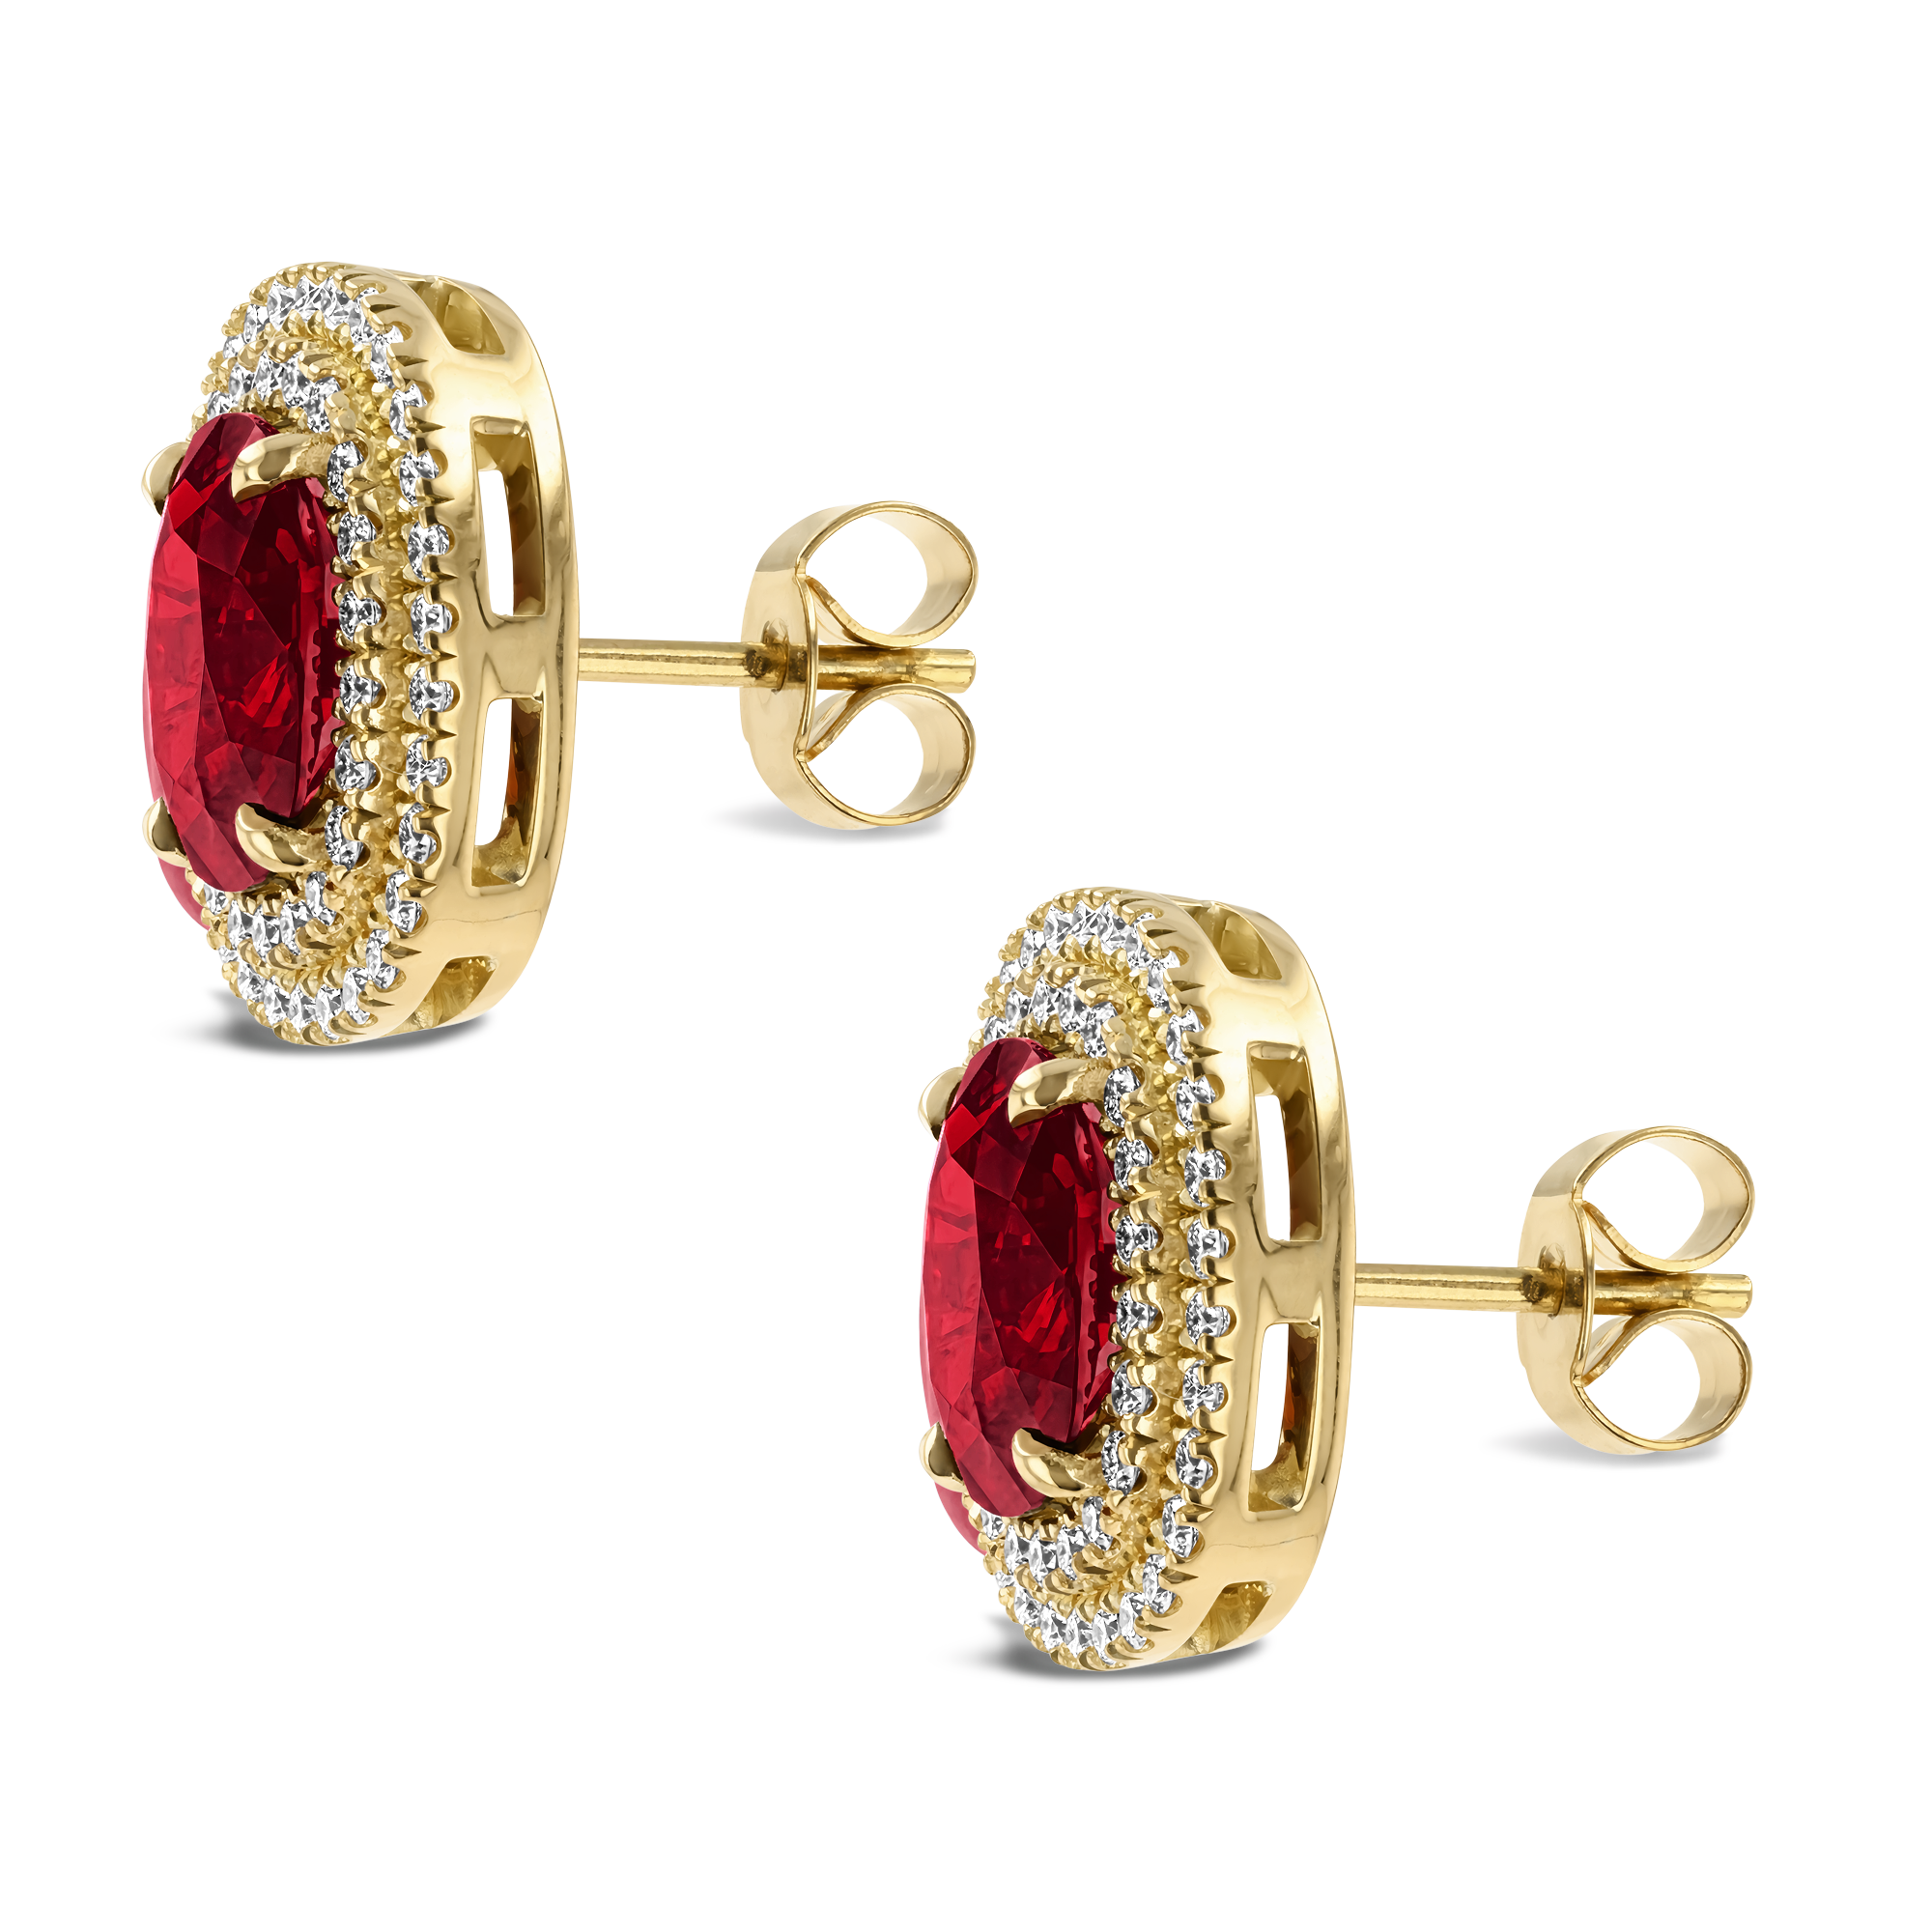 Mozambique Ruby Cluster Earrings with Diamond Halo Oval Cut, Four Claw Set_2